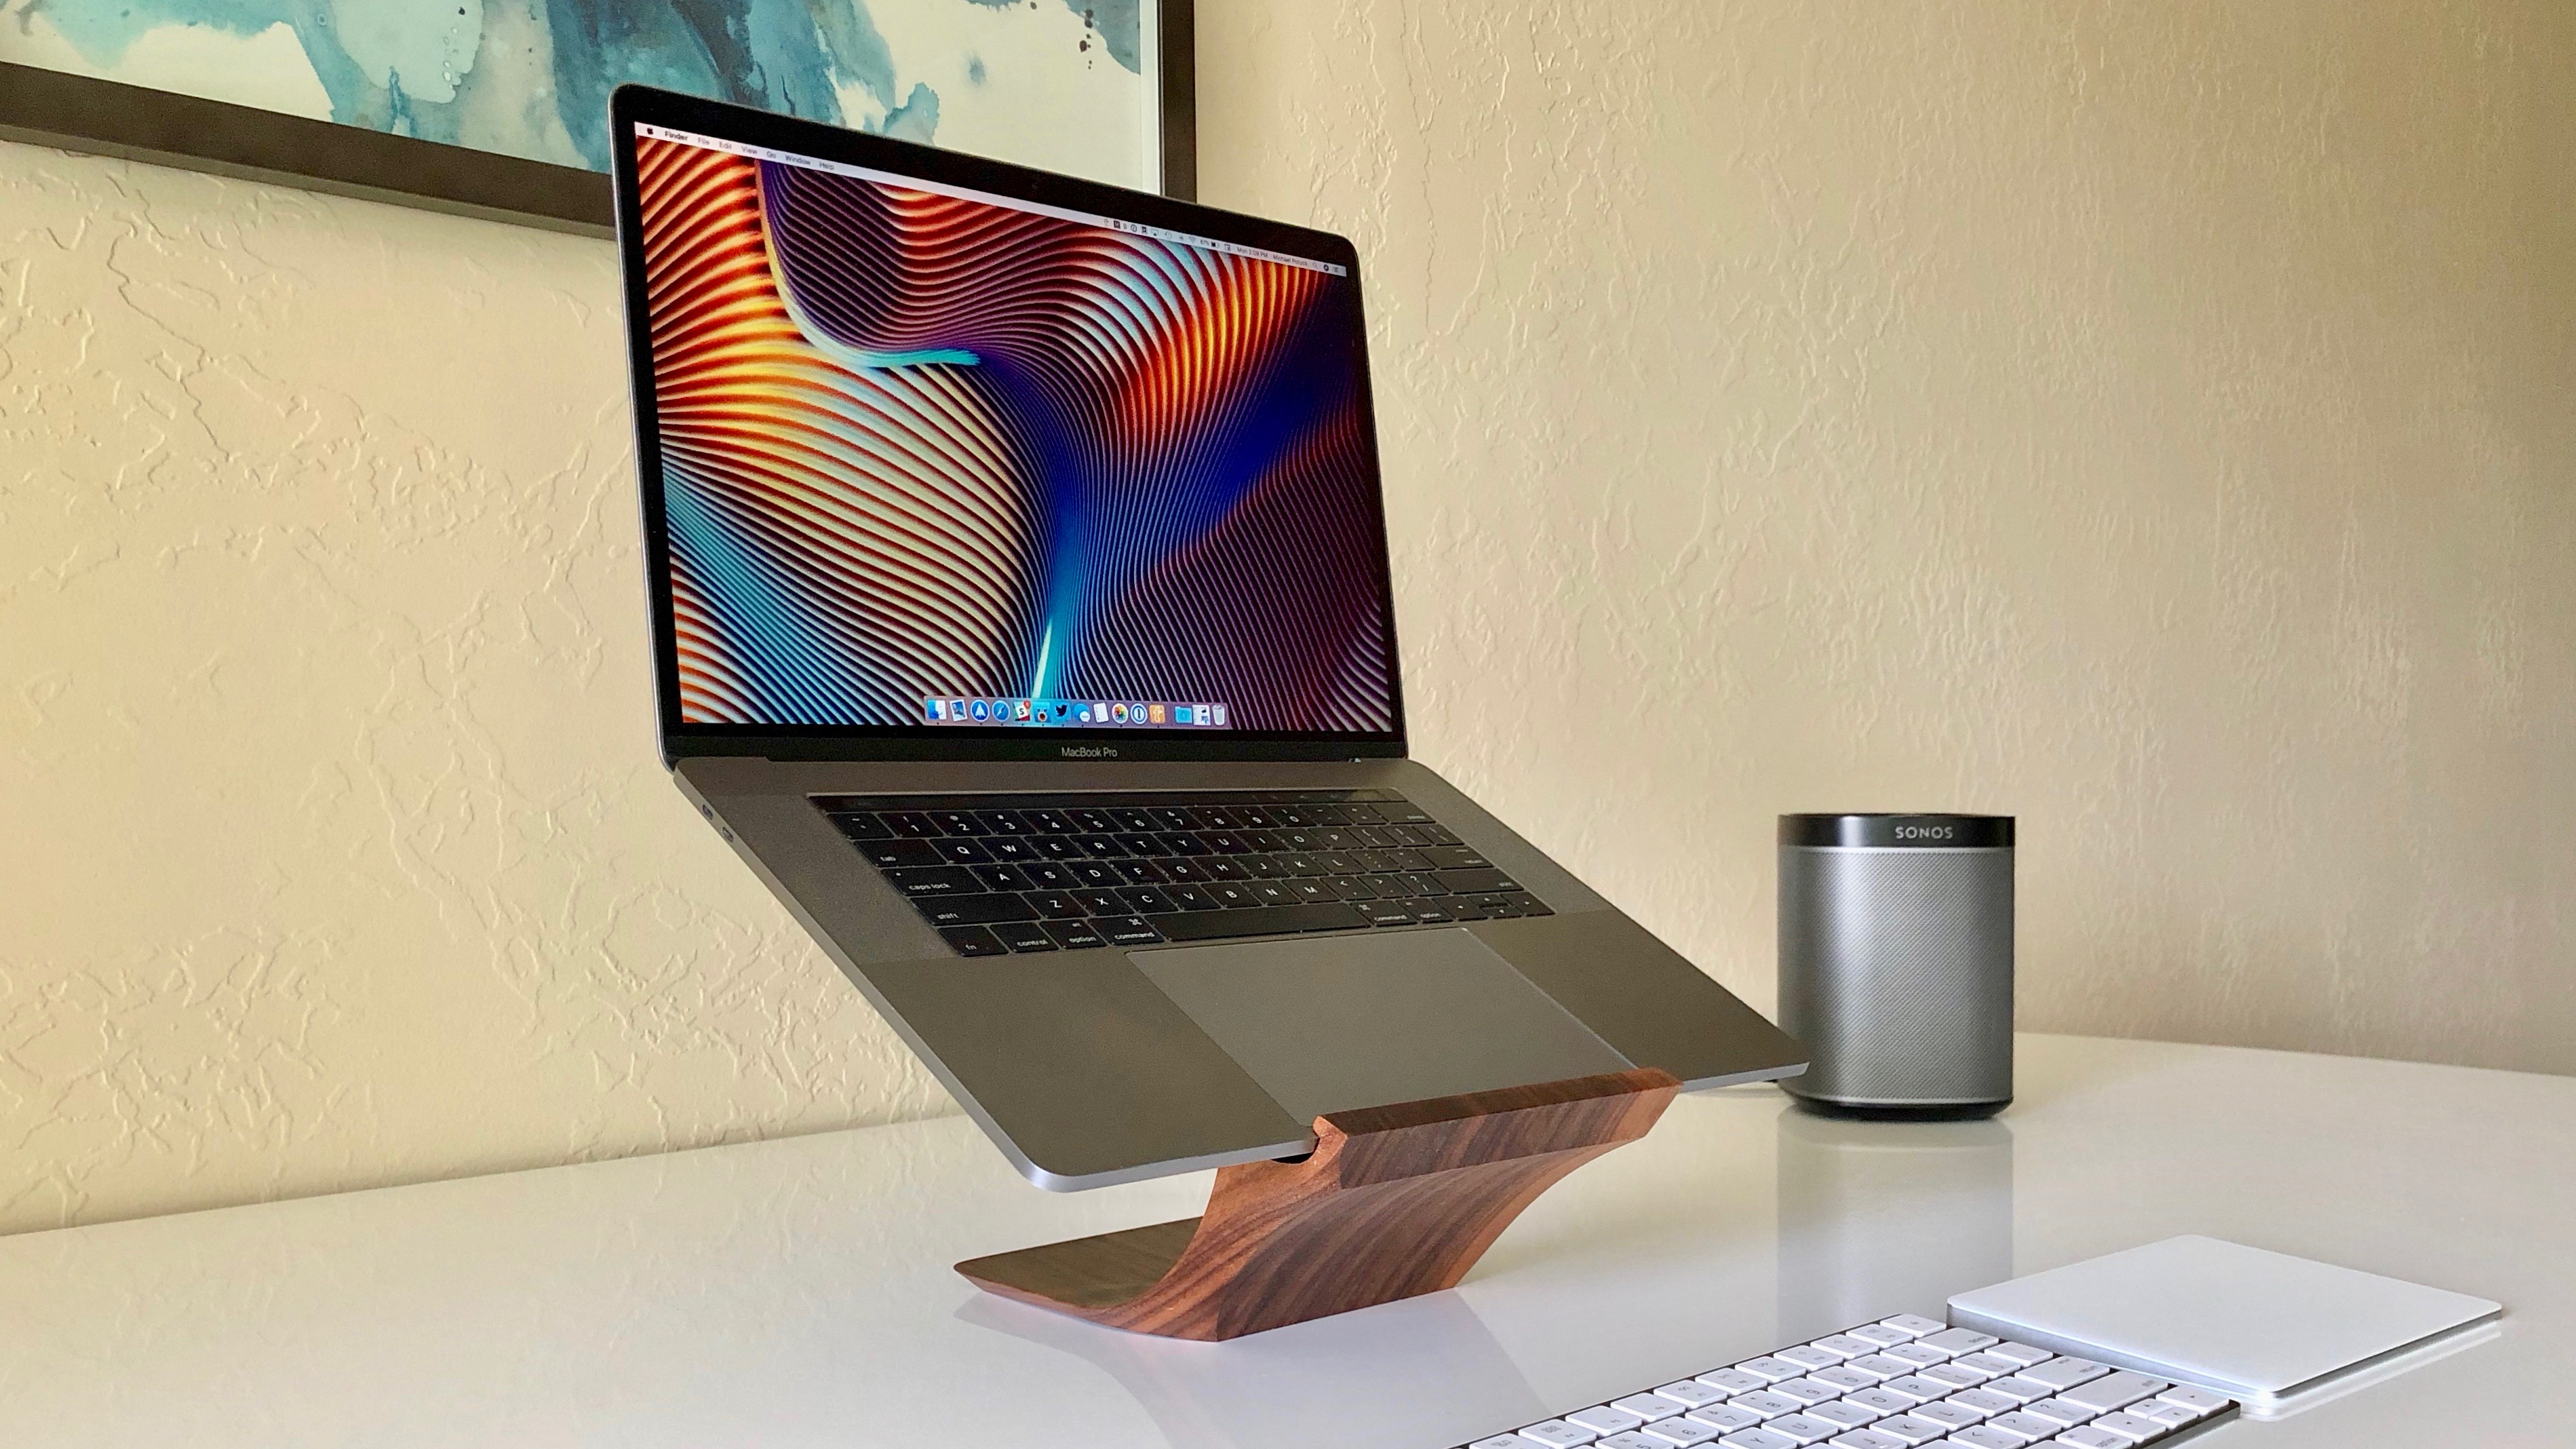 Review: Yohann's MacBook Pro and MacBook Stand is a addition to your setup 9to5Mac